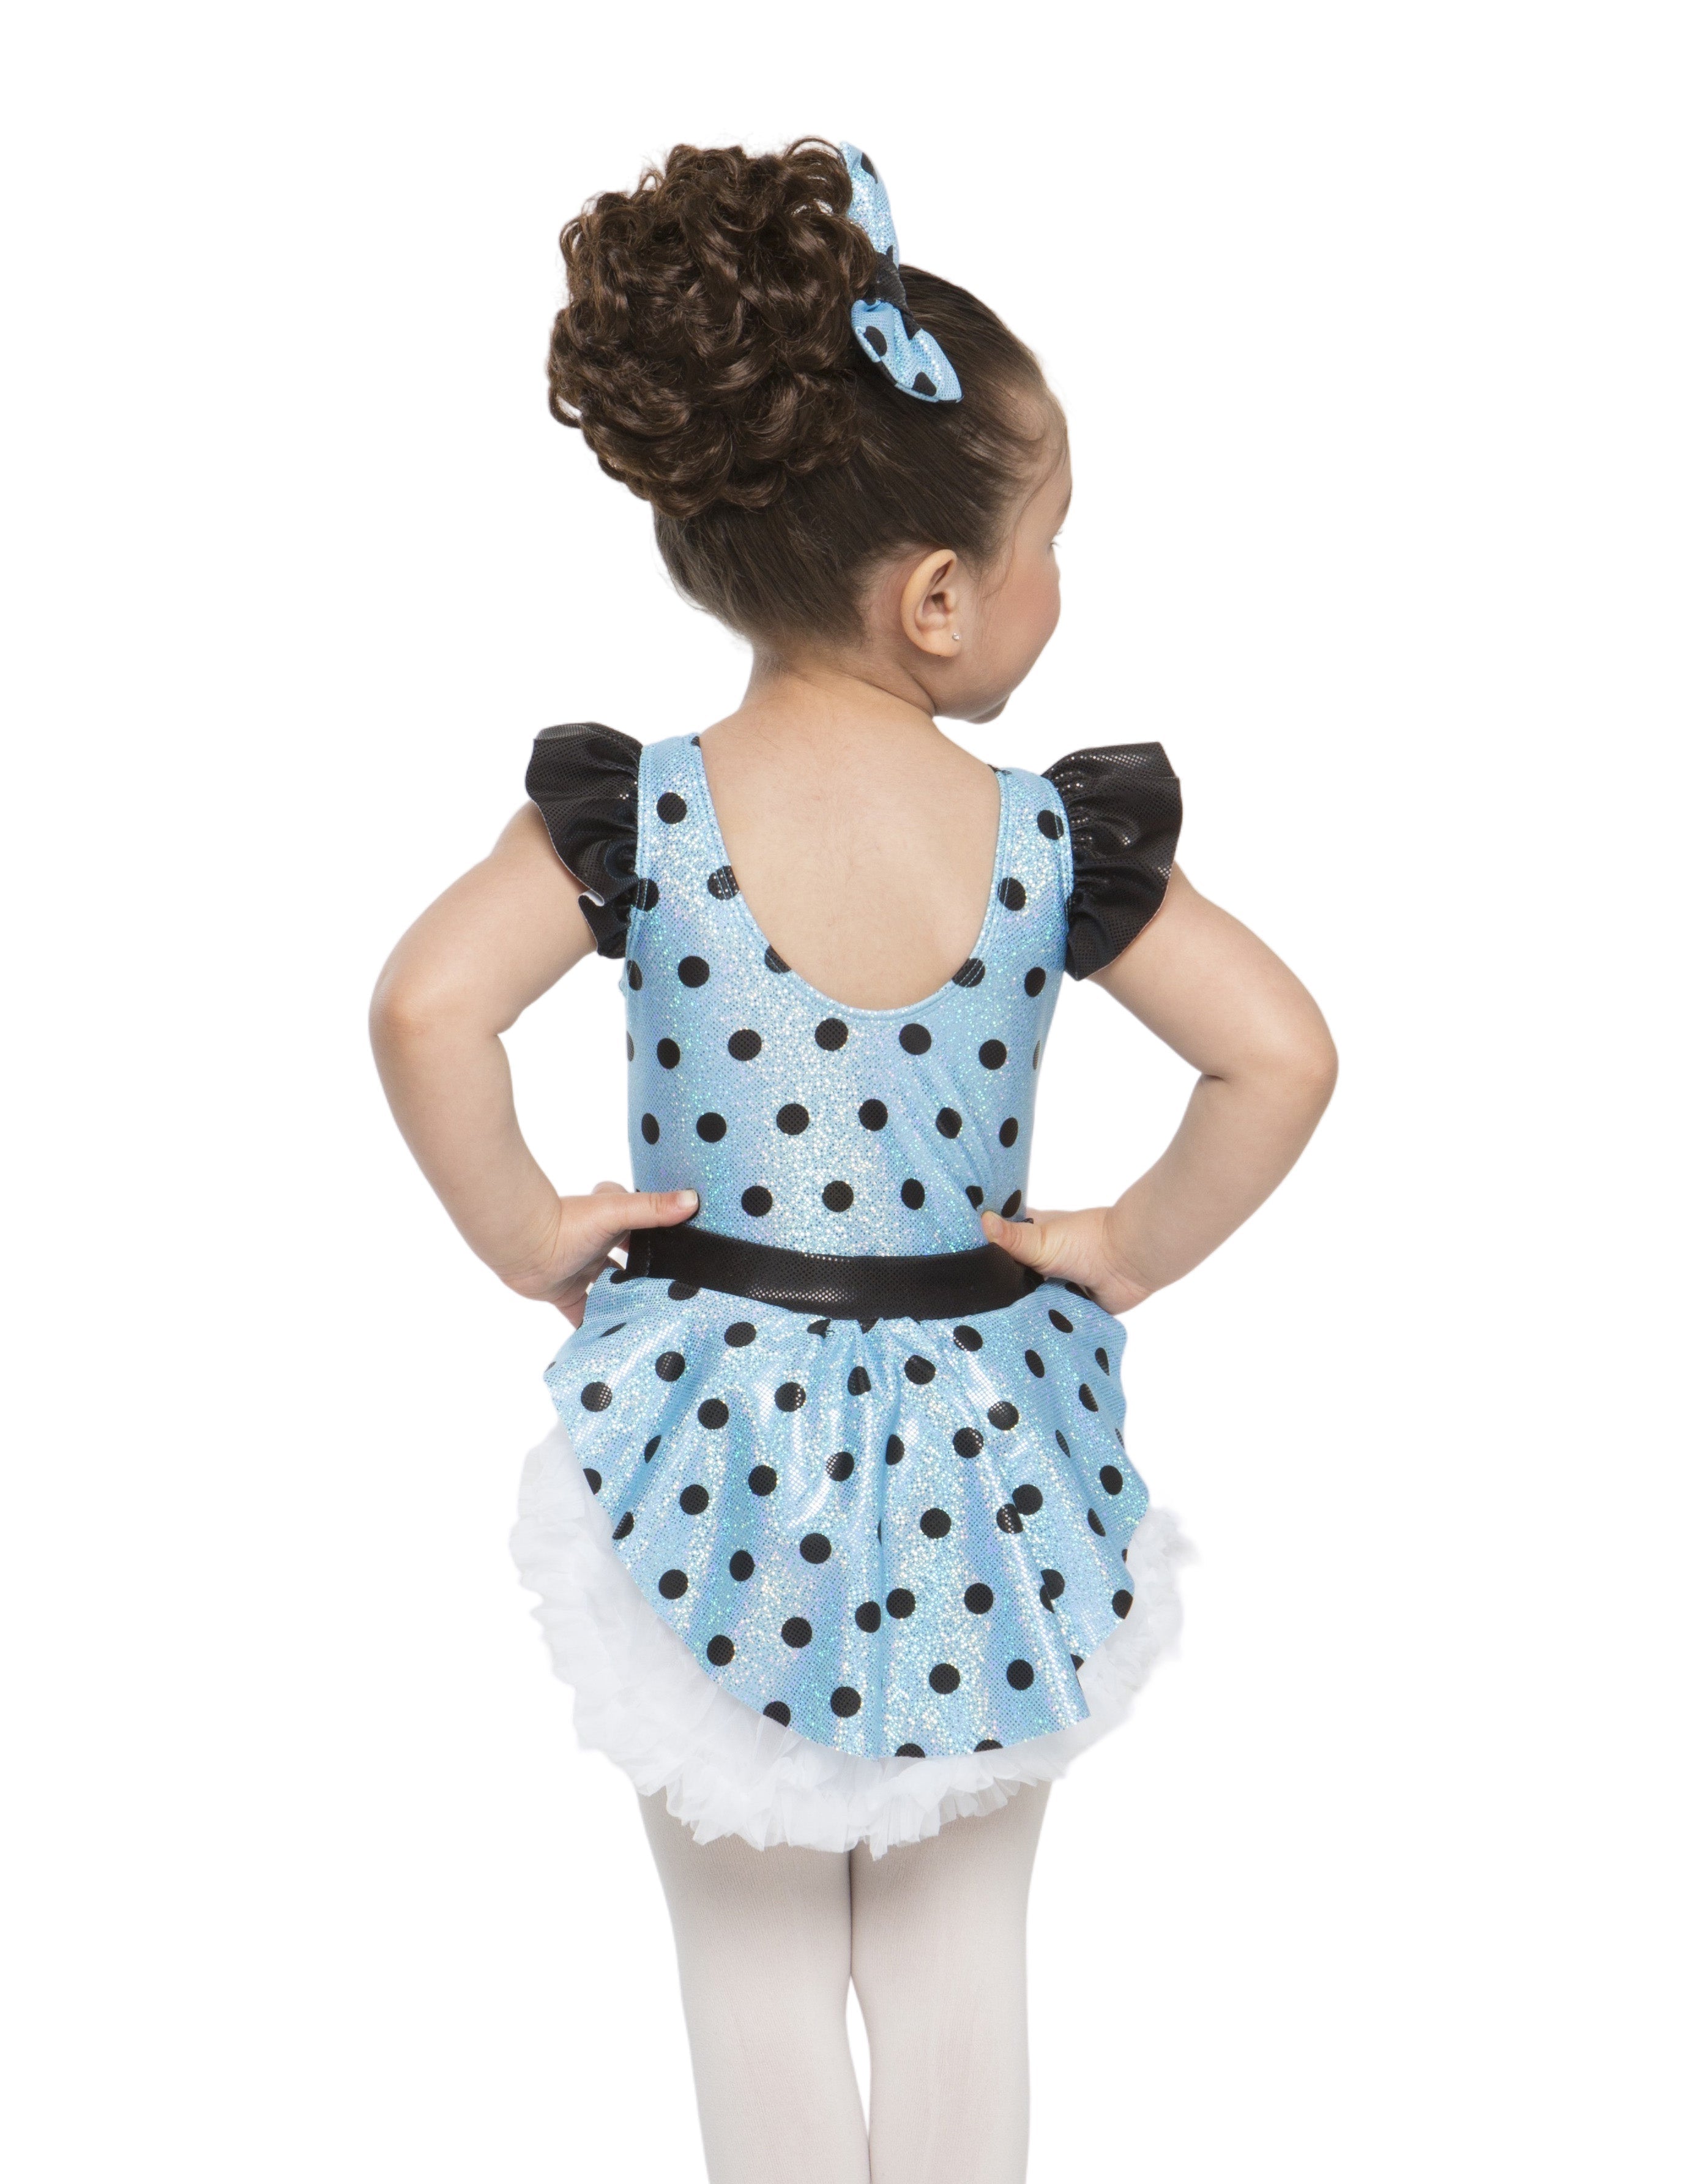 Boogie Bug Ball Dragonfly Pettibustle with Top Skirt